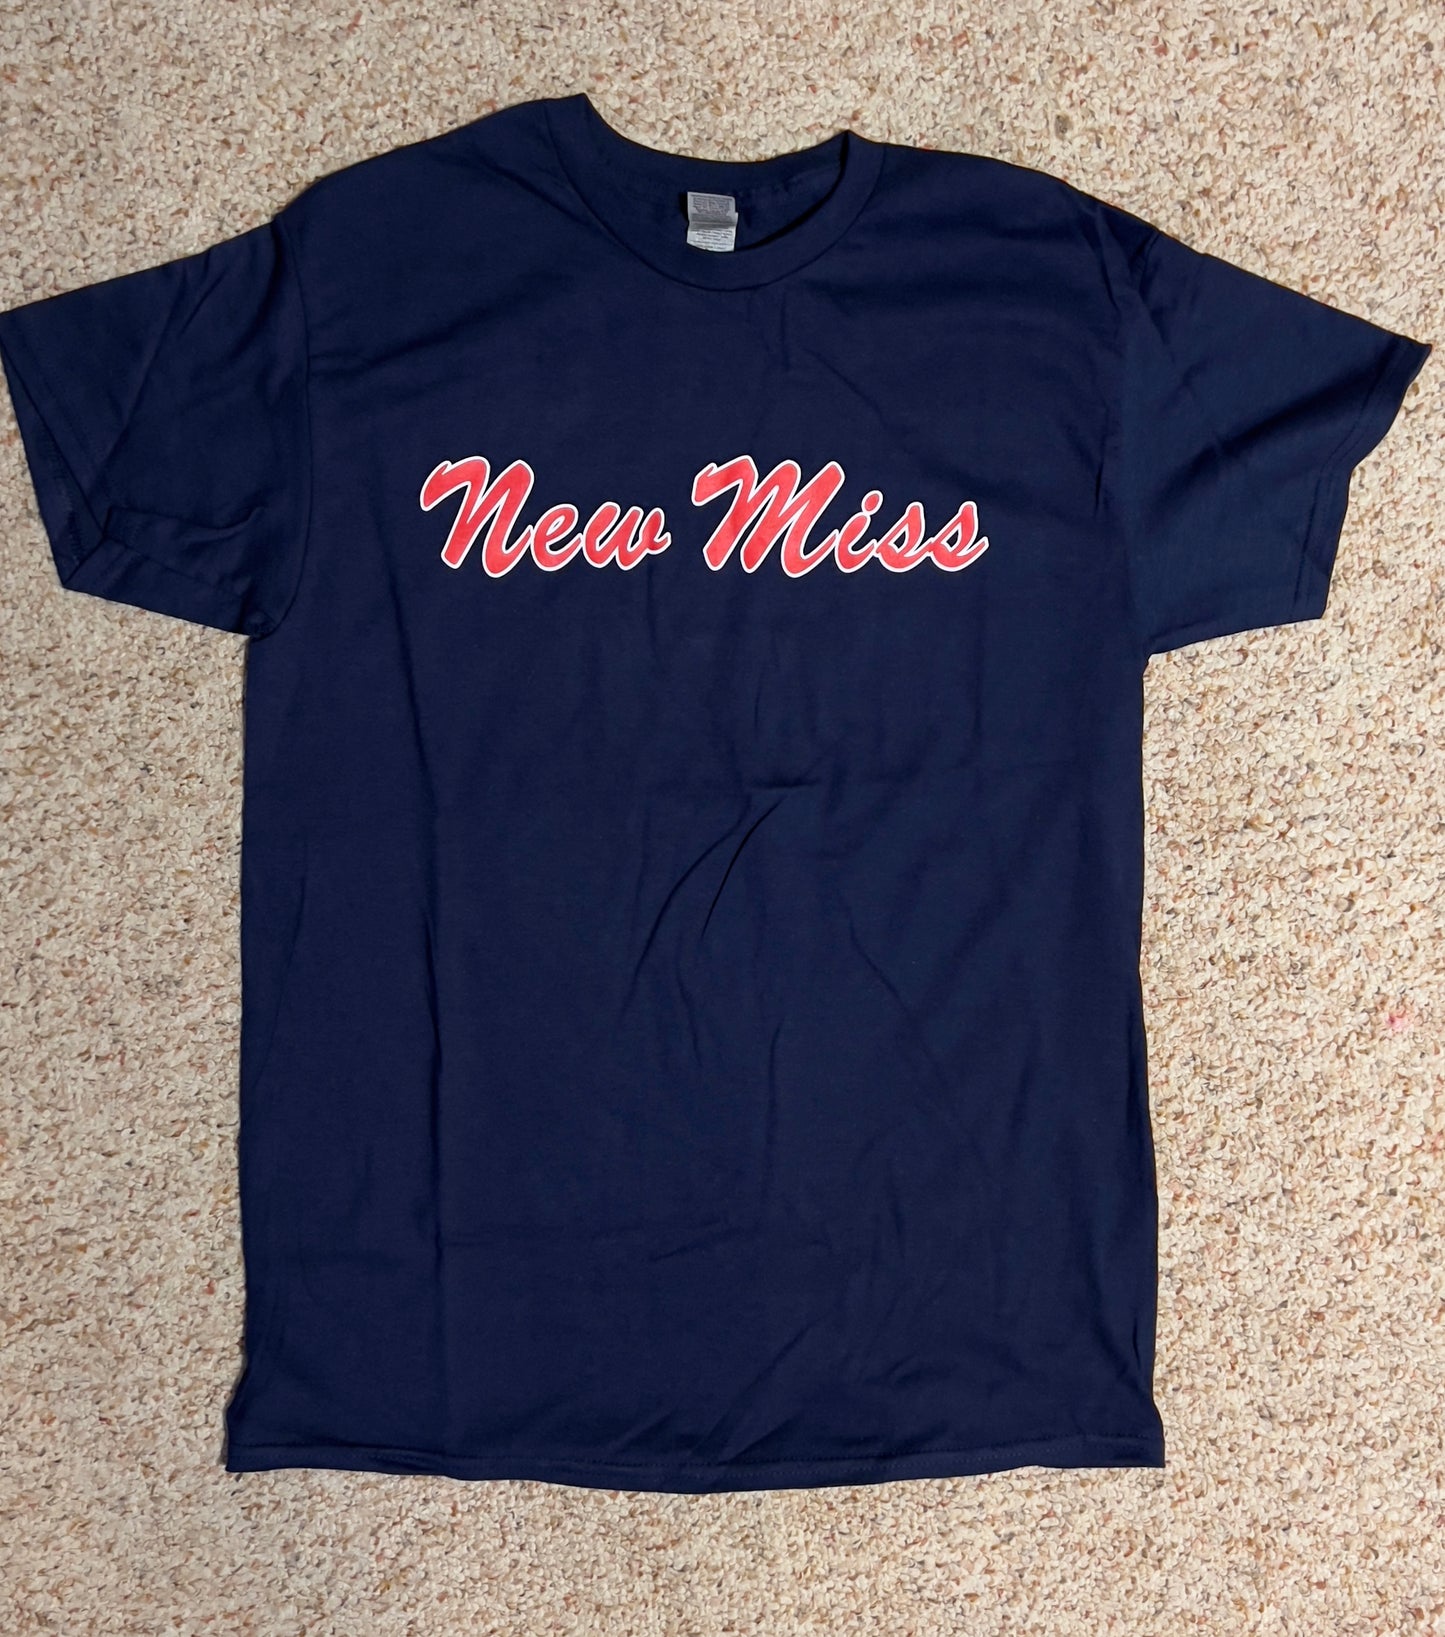 Limited Edition screed printed "New Miss Navy or Red  T-shirt